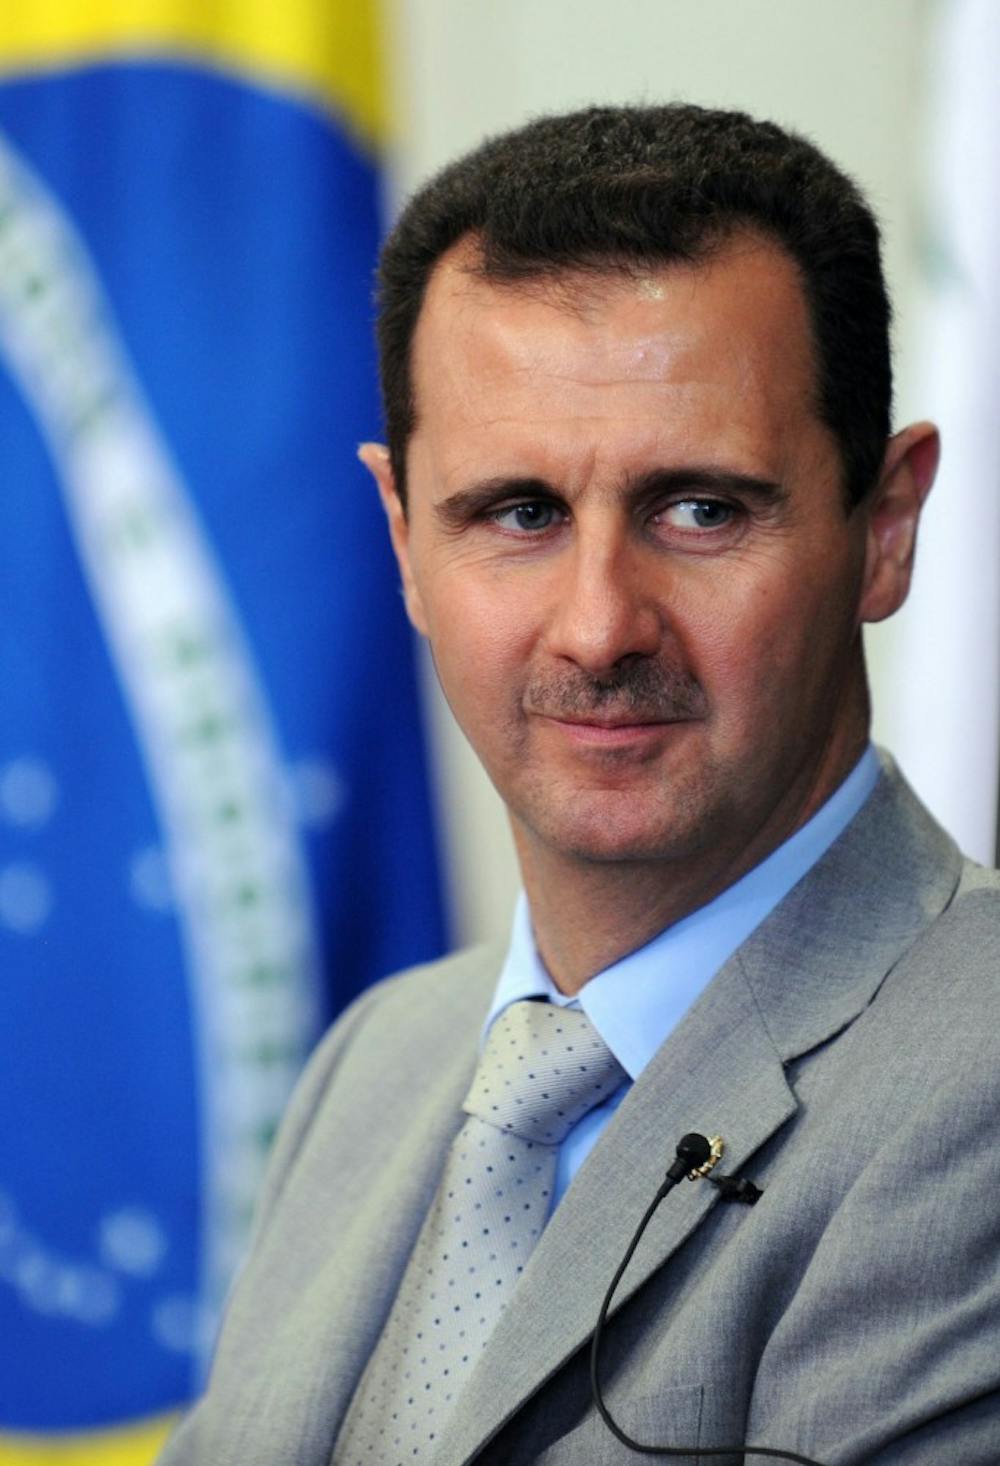 <p>Syrian President Bashar Al-Assad conducted chemical attacks last week, leading to U.S. missile strikes against a Syrian airfield</p>